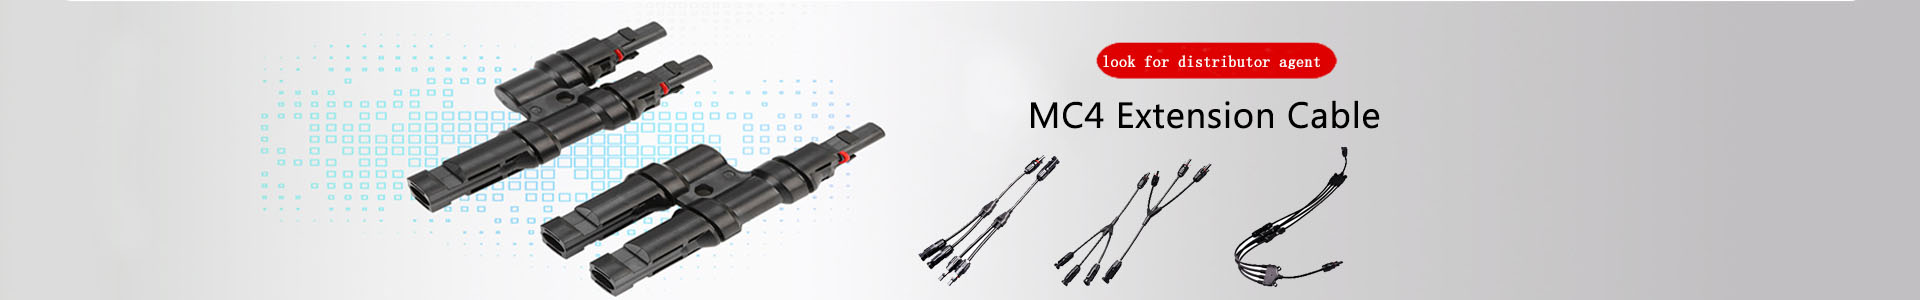 solar panel cable mc4-Company news-Solar | solar connector,solar branch connector,diode fuse connector,MC4 extnsion cable,H1Z2Z2 solar cable, UL4703 solar cable | Leading manufacturer and supplier of solar pv cables and connectors